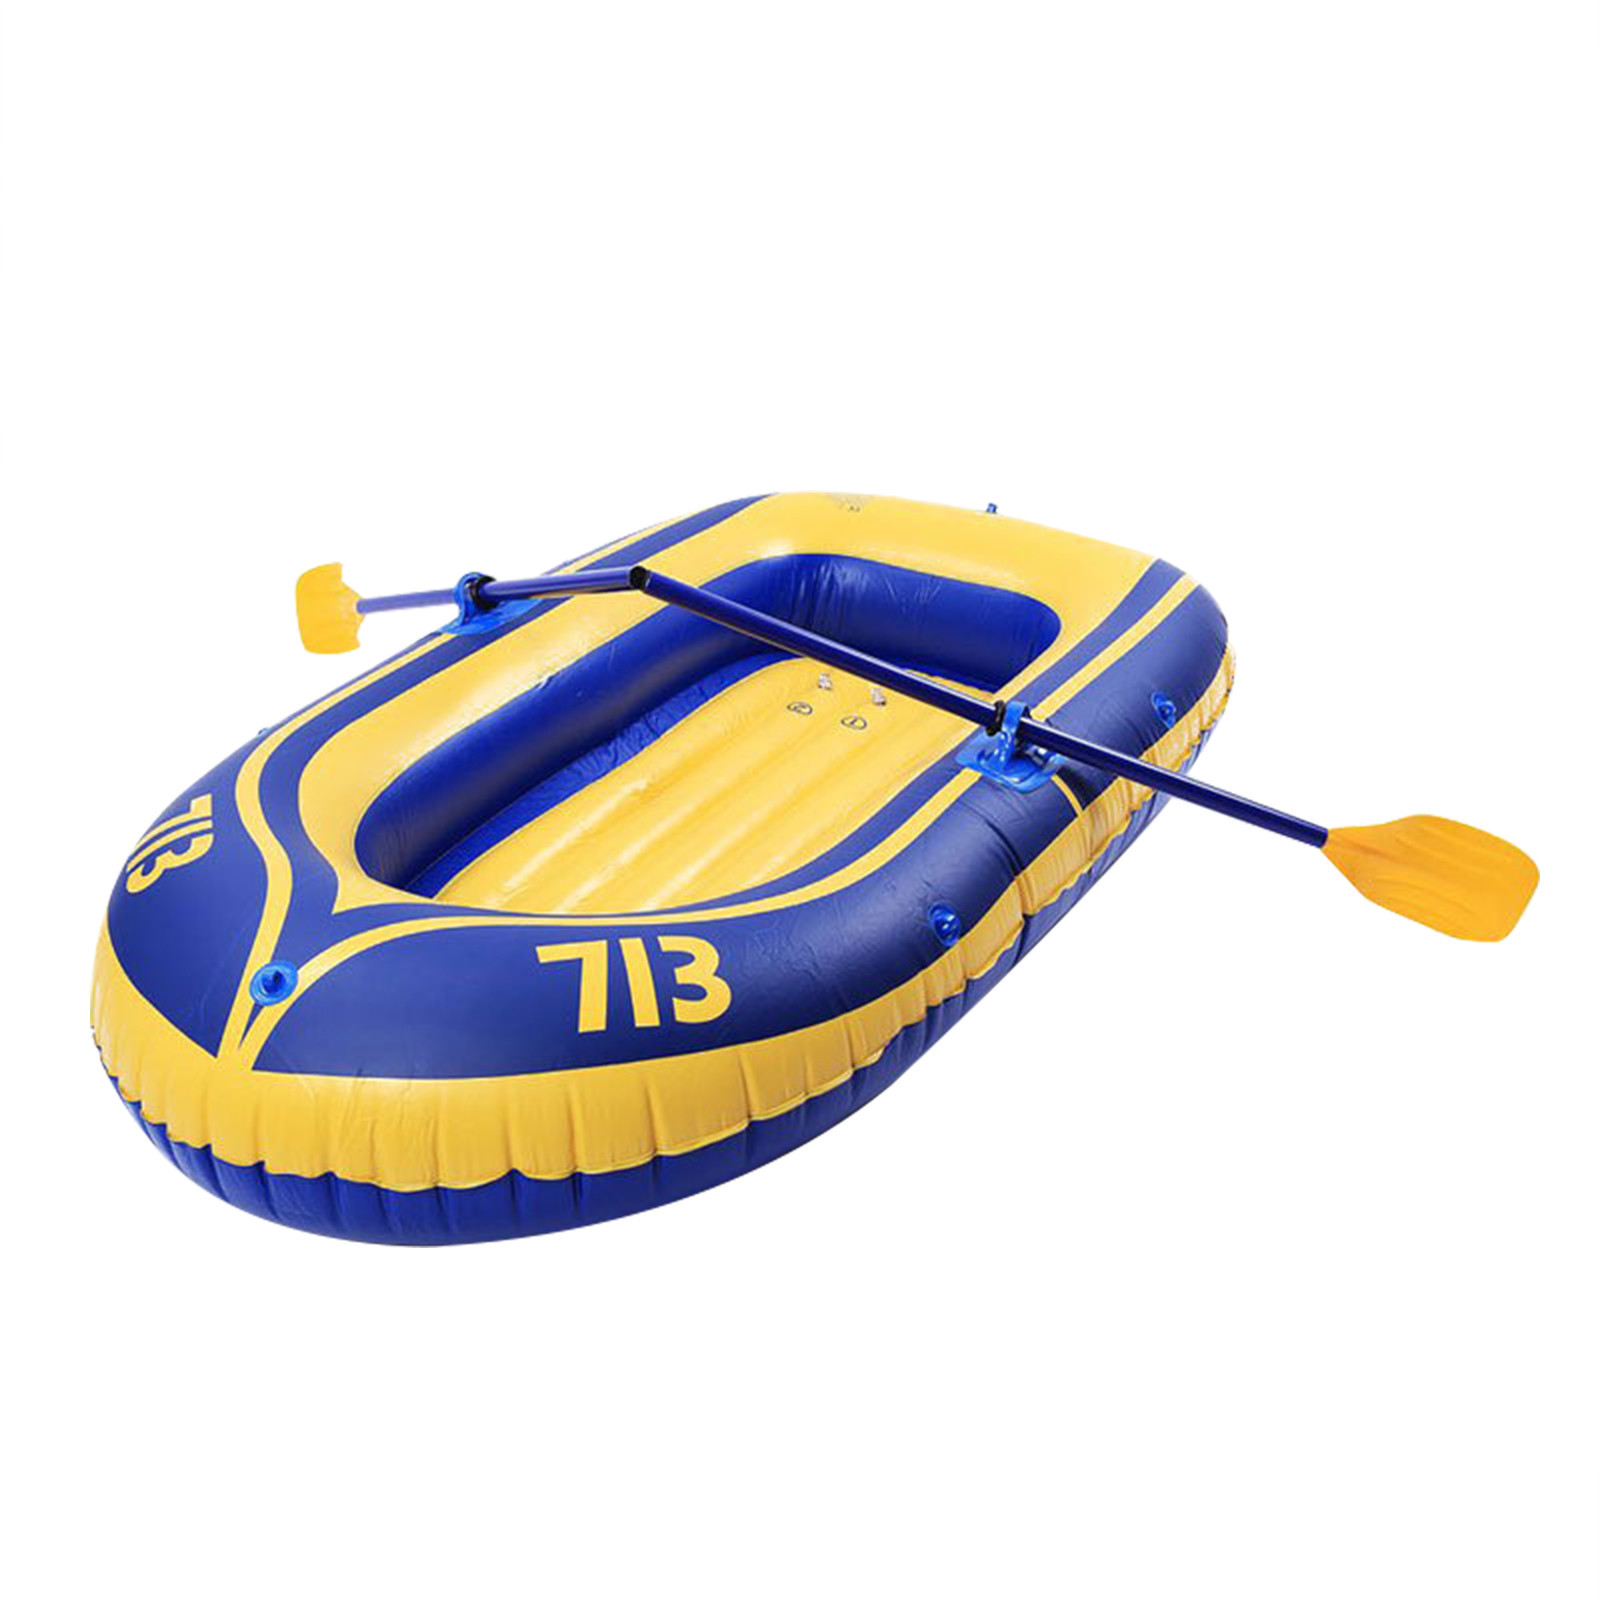 SDJMa Double Kayak,Thicken Inflatable Raft for Adults and Kids, Portable Fishing Boat for Lake with Foot Pump Paddle Repair Kit - image 2 of 8